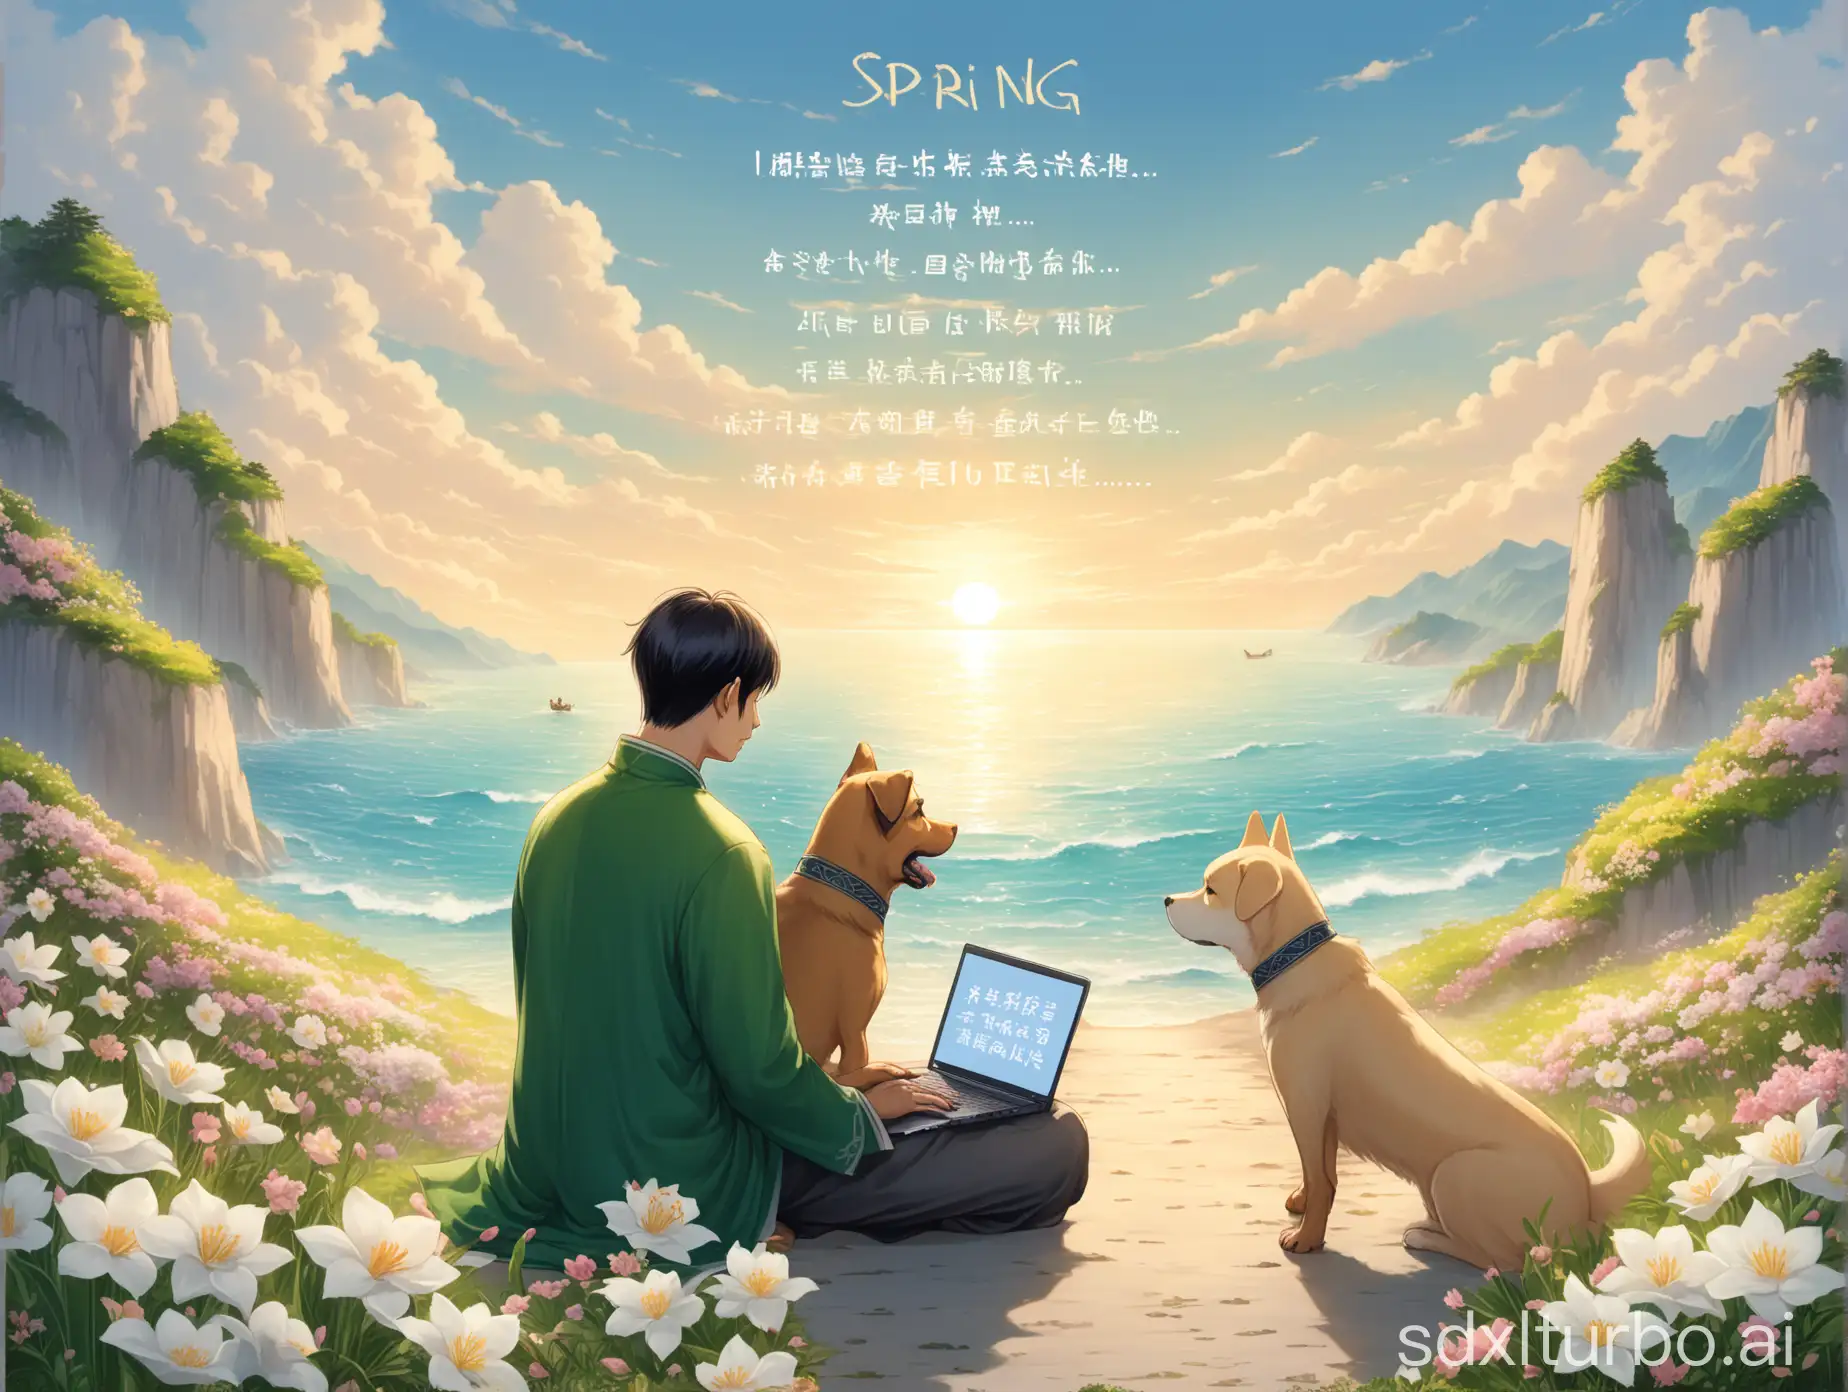 Asian-Man-with-Laptop-and-Two-Dogs-by-the-Sea-Embracing-SelfDiscipline-and-Ambition